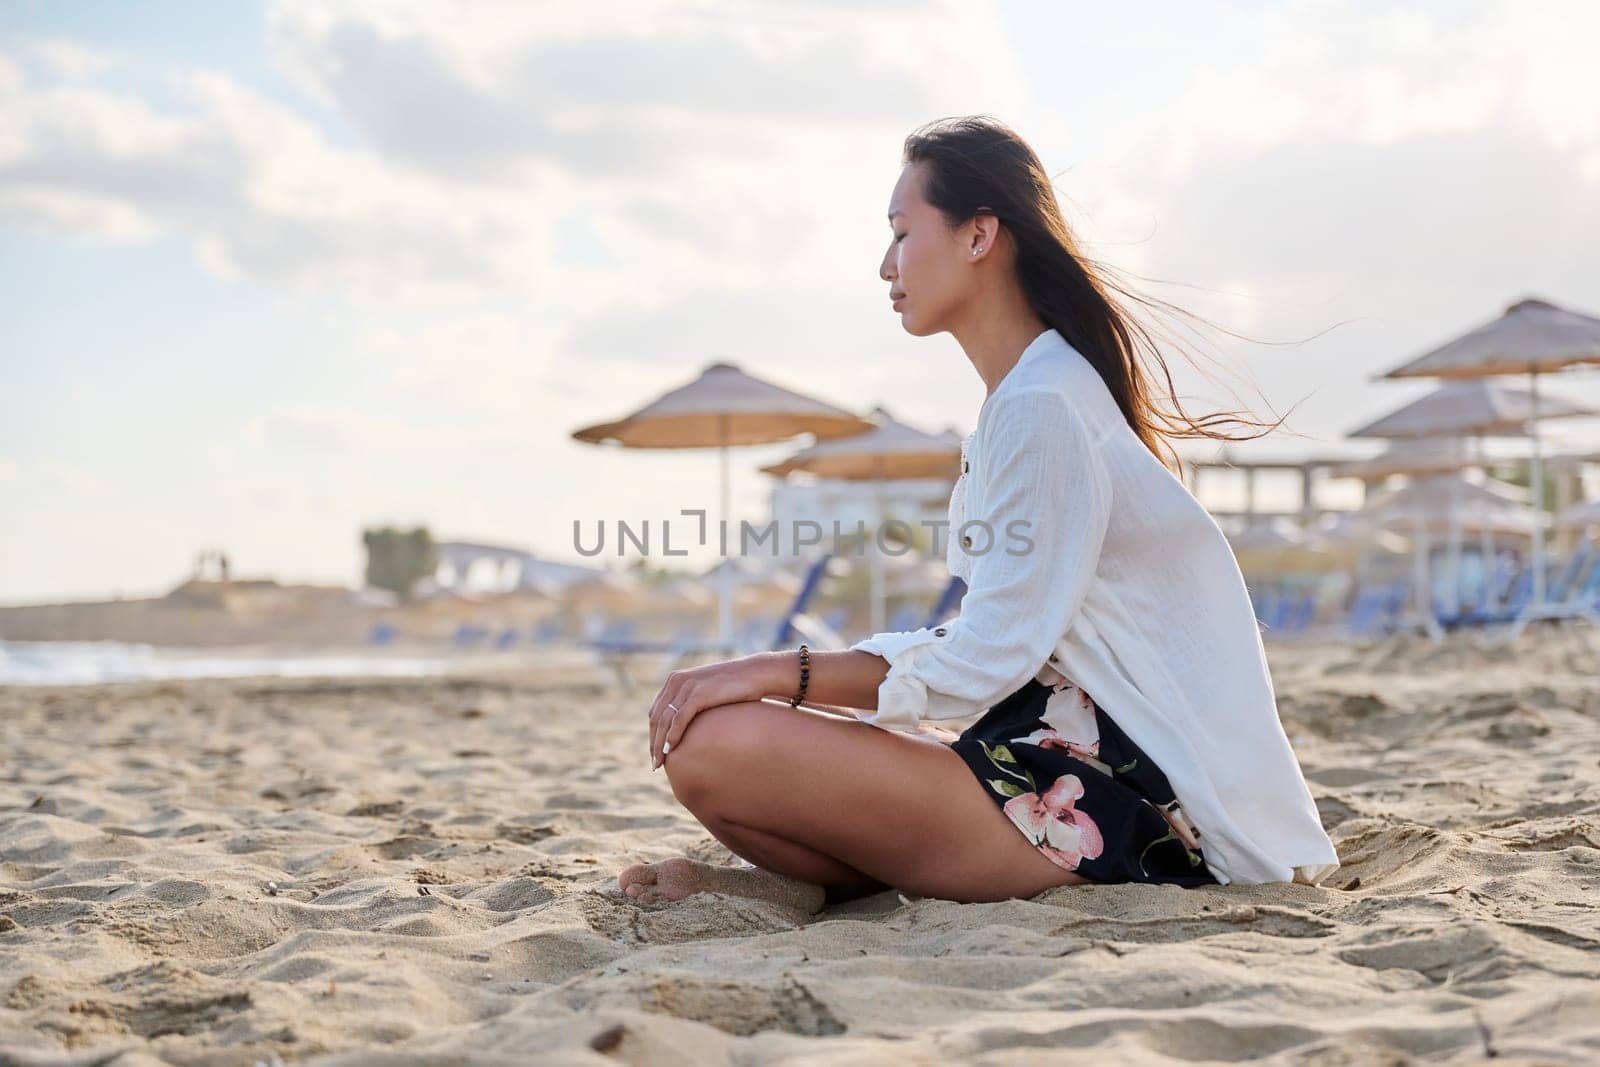 Young relaxed woman sitting in lotus position on beach, morning sea nature background. Natural Asian woman with closed eyes on sand. Meditation harmony, care for mental physical health, energy, people